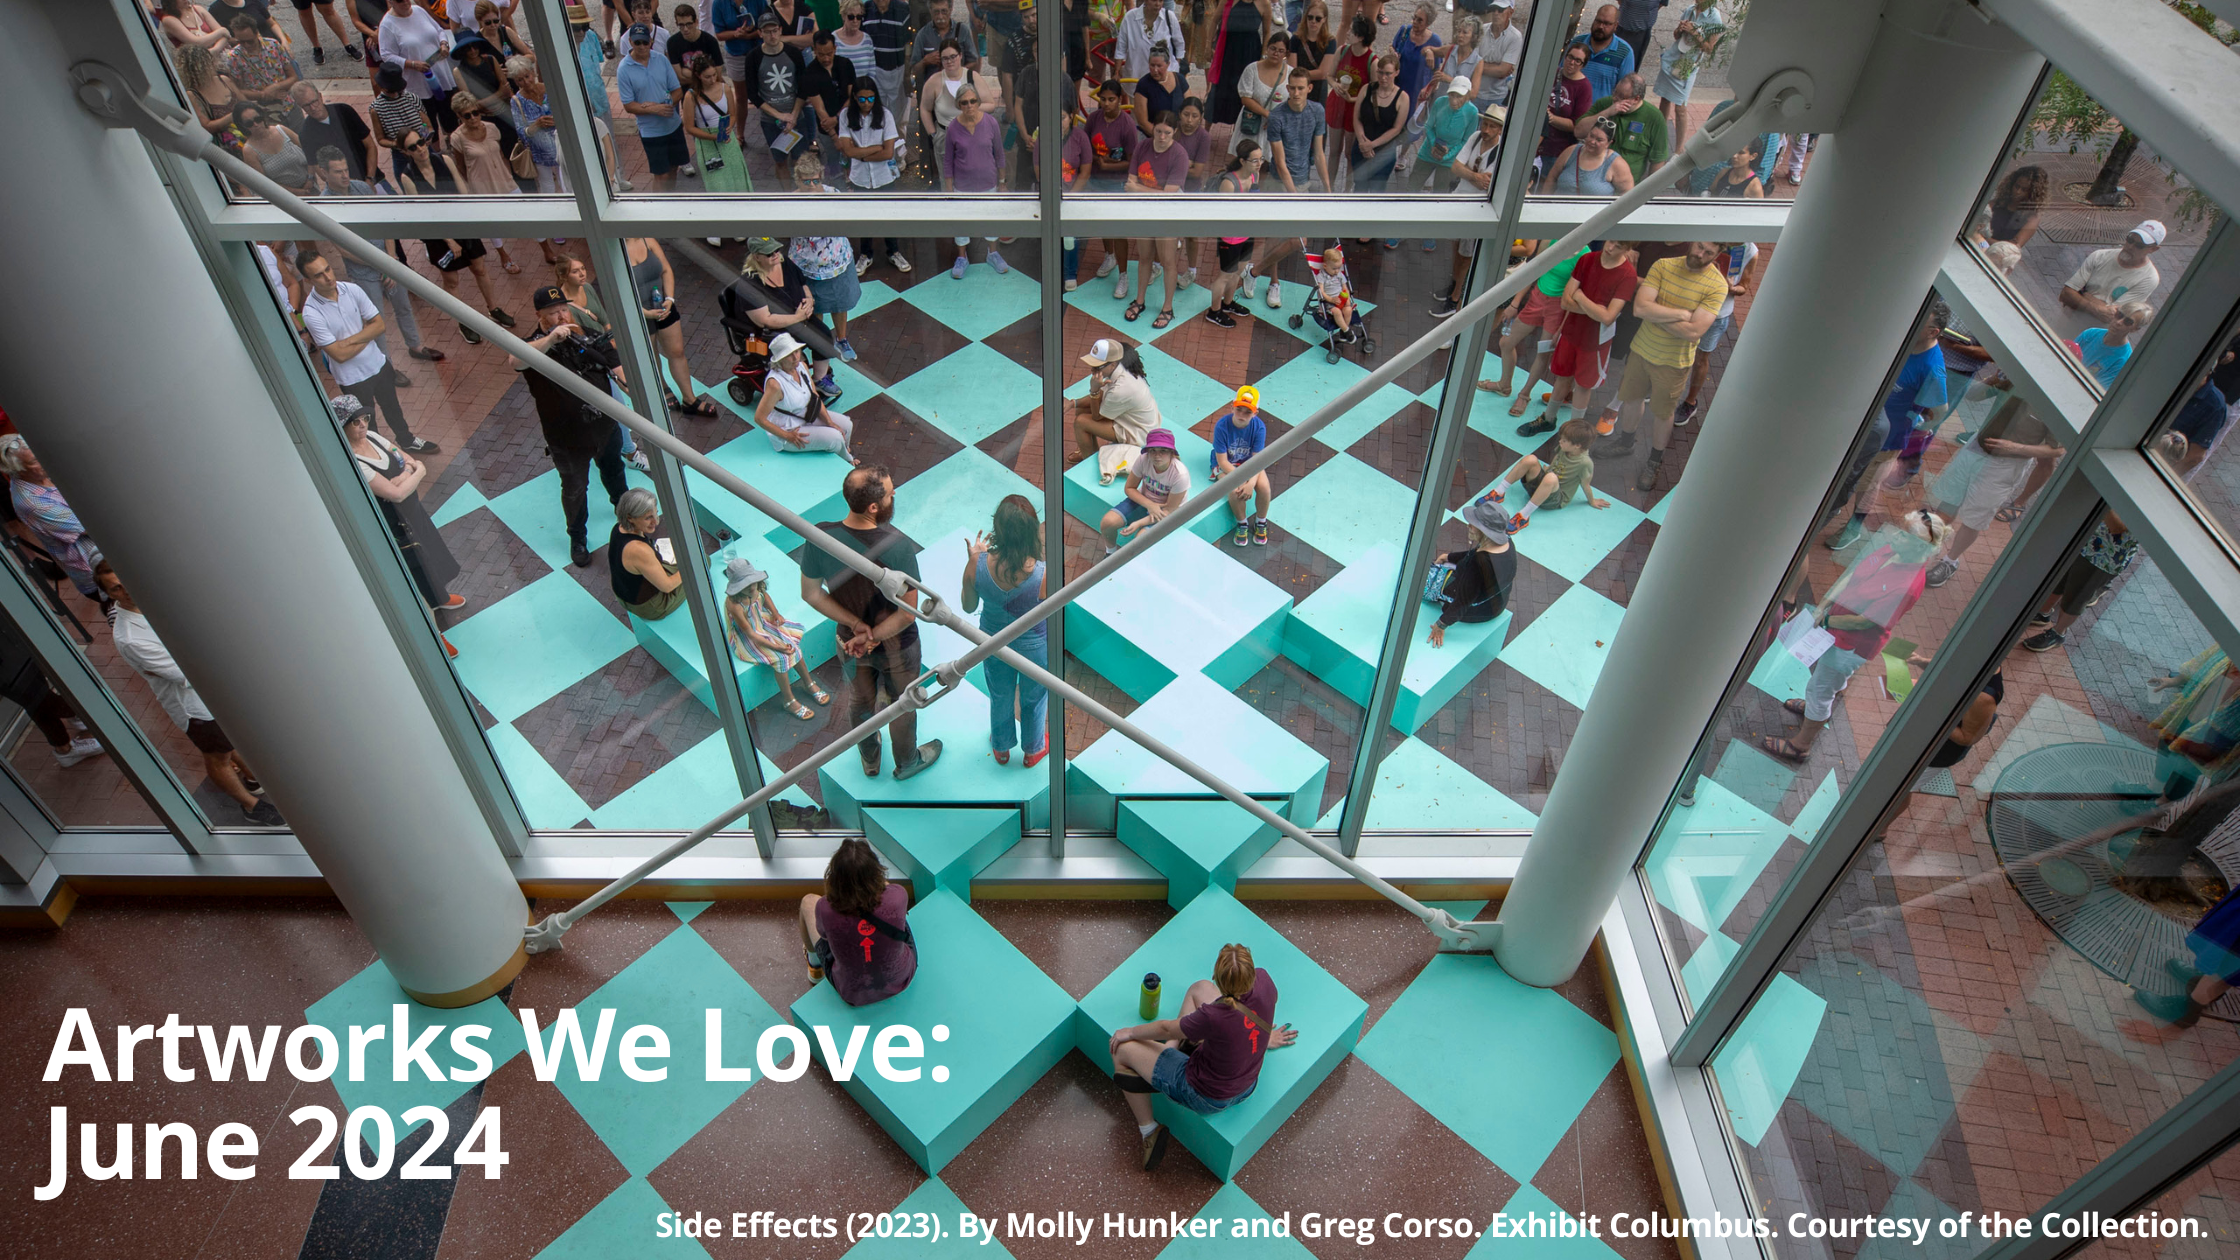 A view from above looking down onto an outdoor art installation. The installation is a series of teal-colored square blocks arranged in a checkerboard pattern. People are sitting on the blocks, interacting with the art piece. There are also many people standing behind a glass window looking down at the installation. The text 